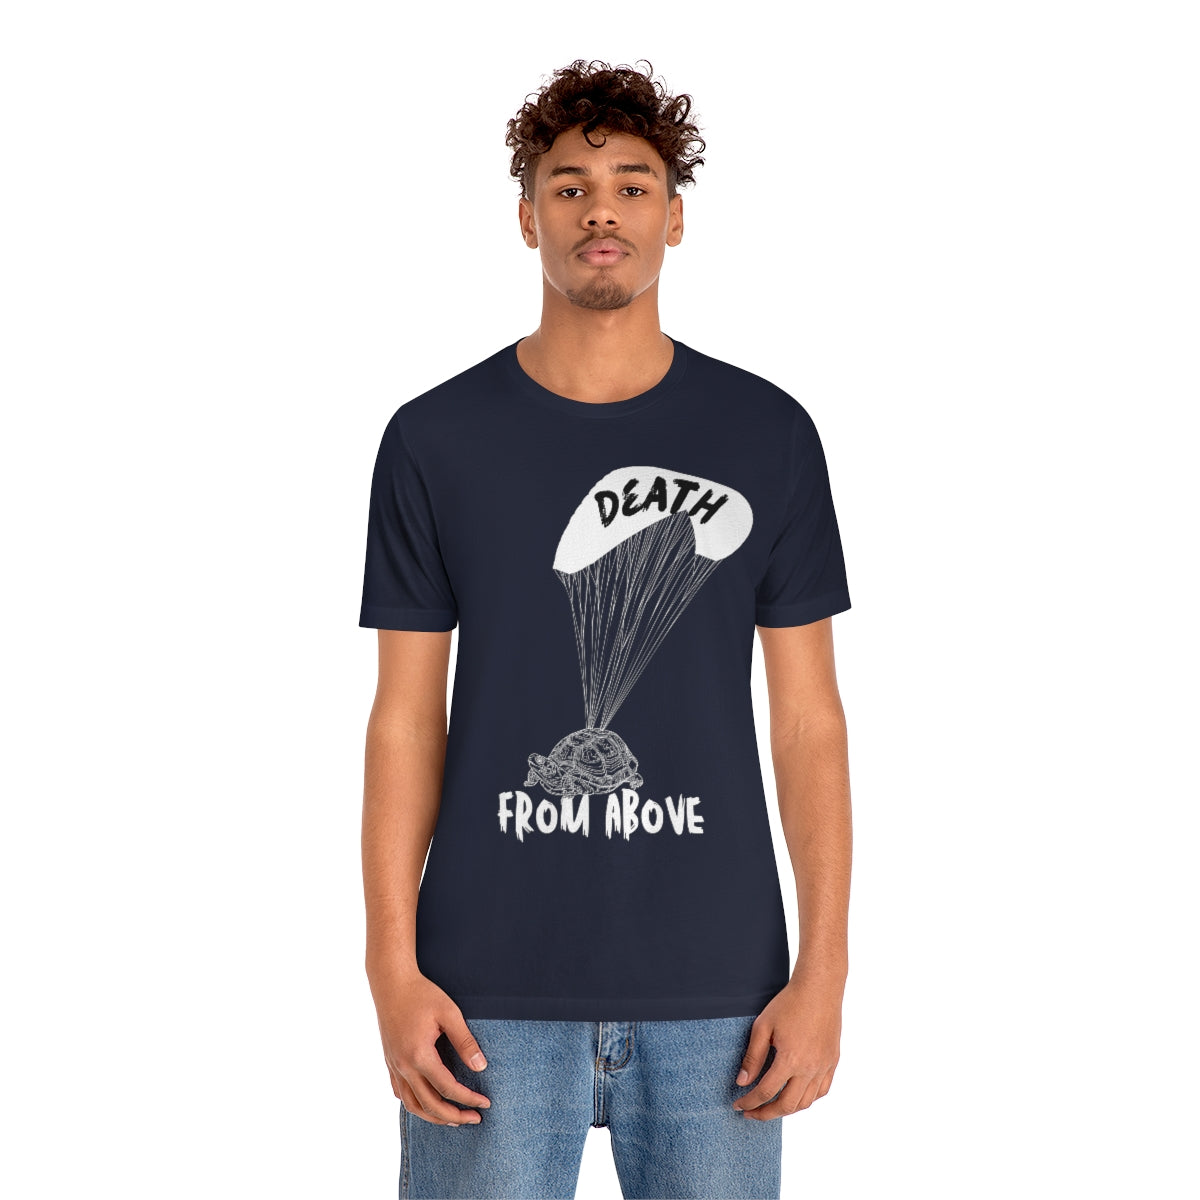 Death From Above Unisex Jersey Short Sleeve Tee